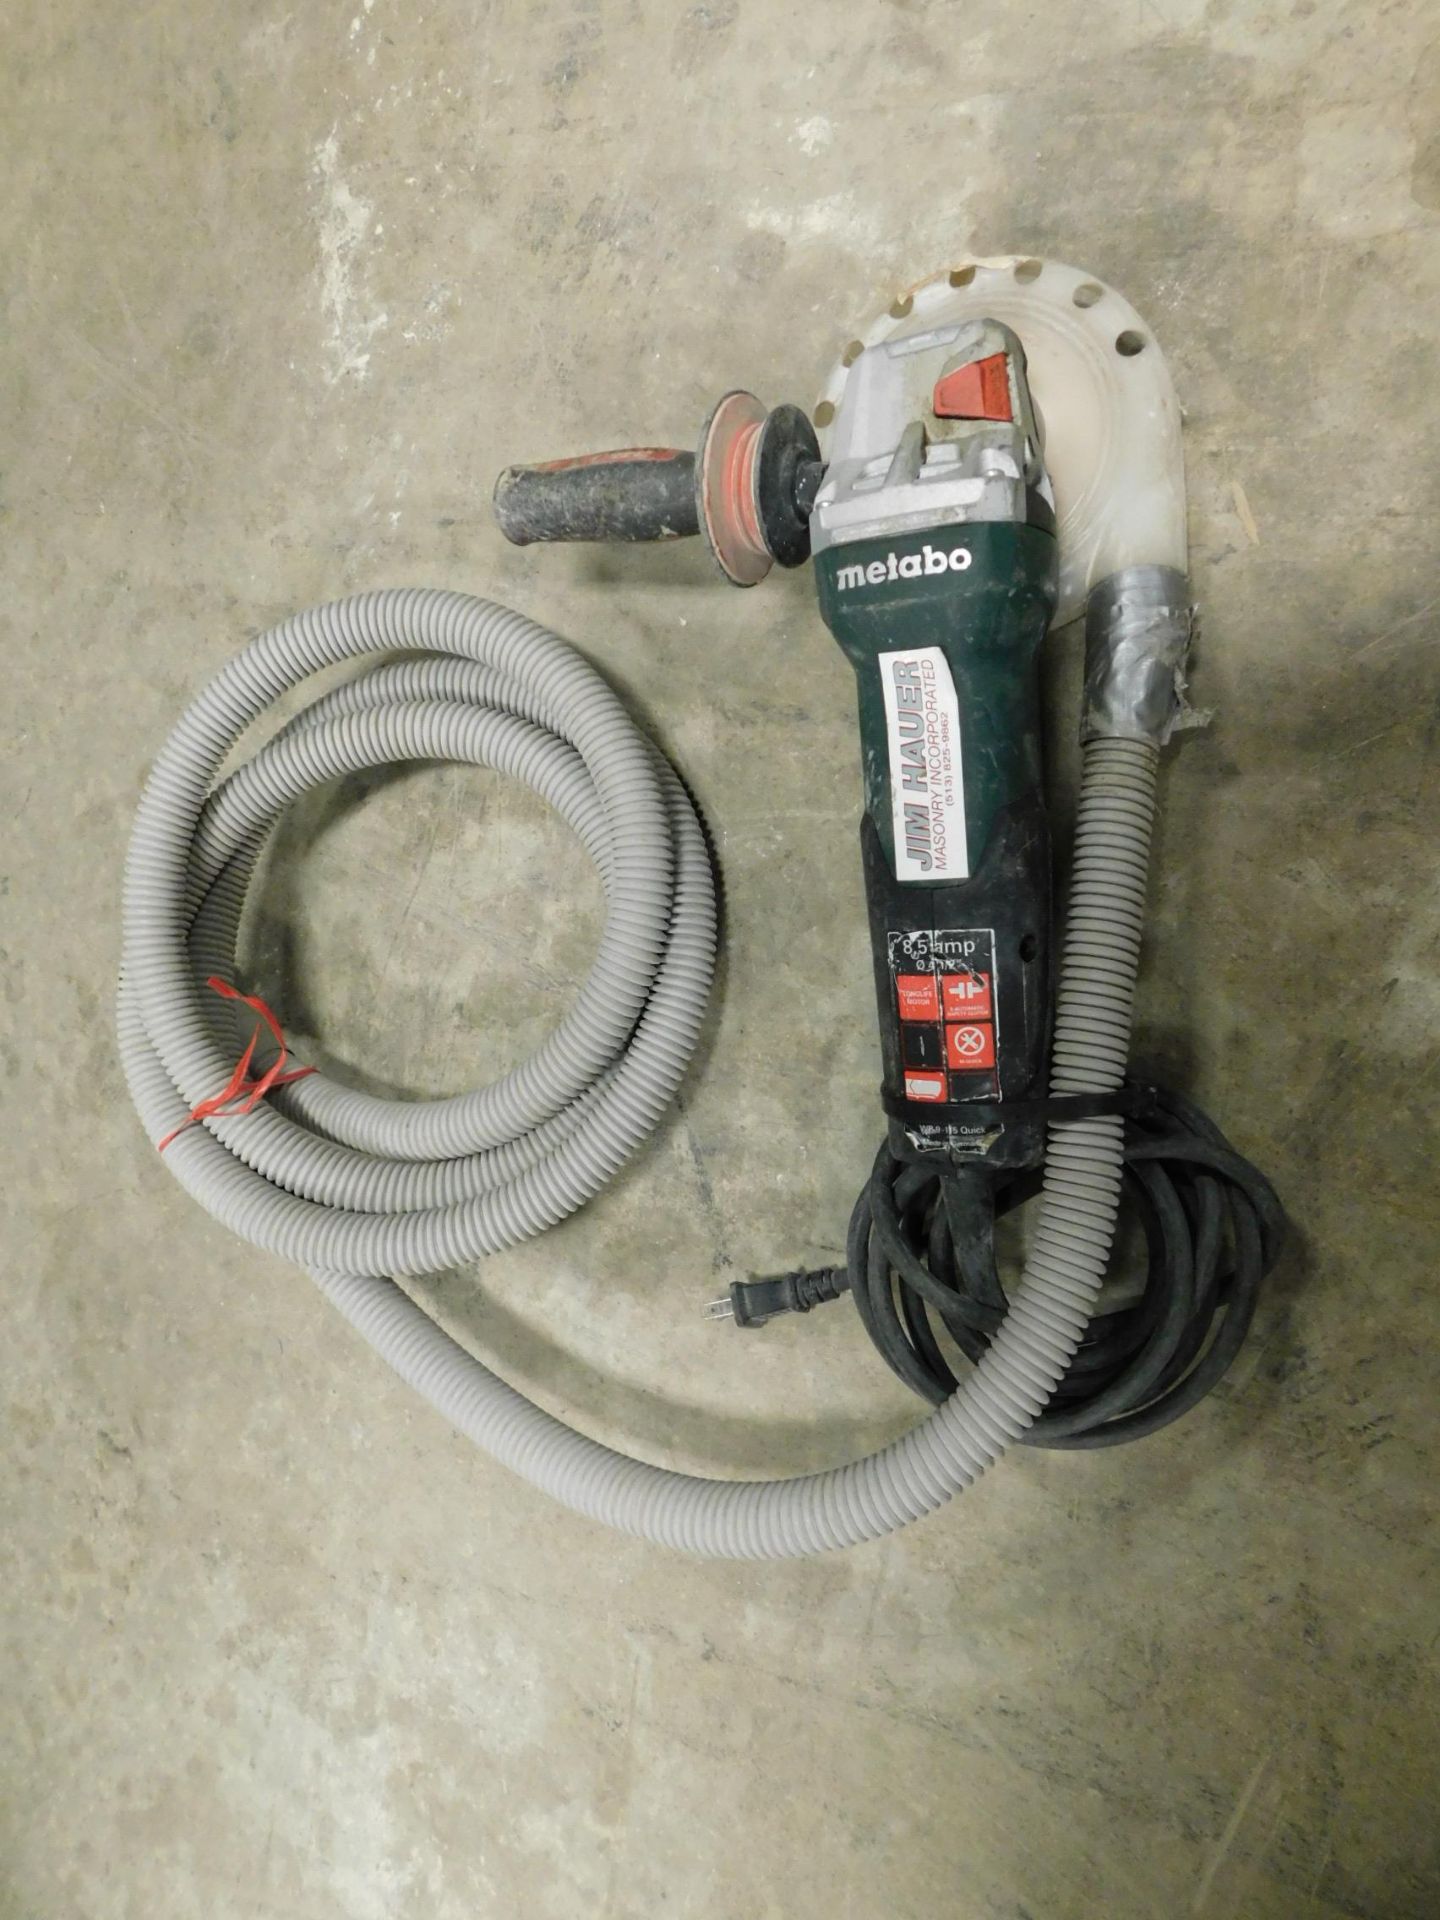 Metabo 4 1/2" Angle Grinder, with Dust Shield and Hose